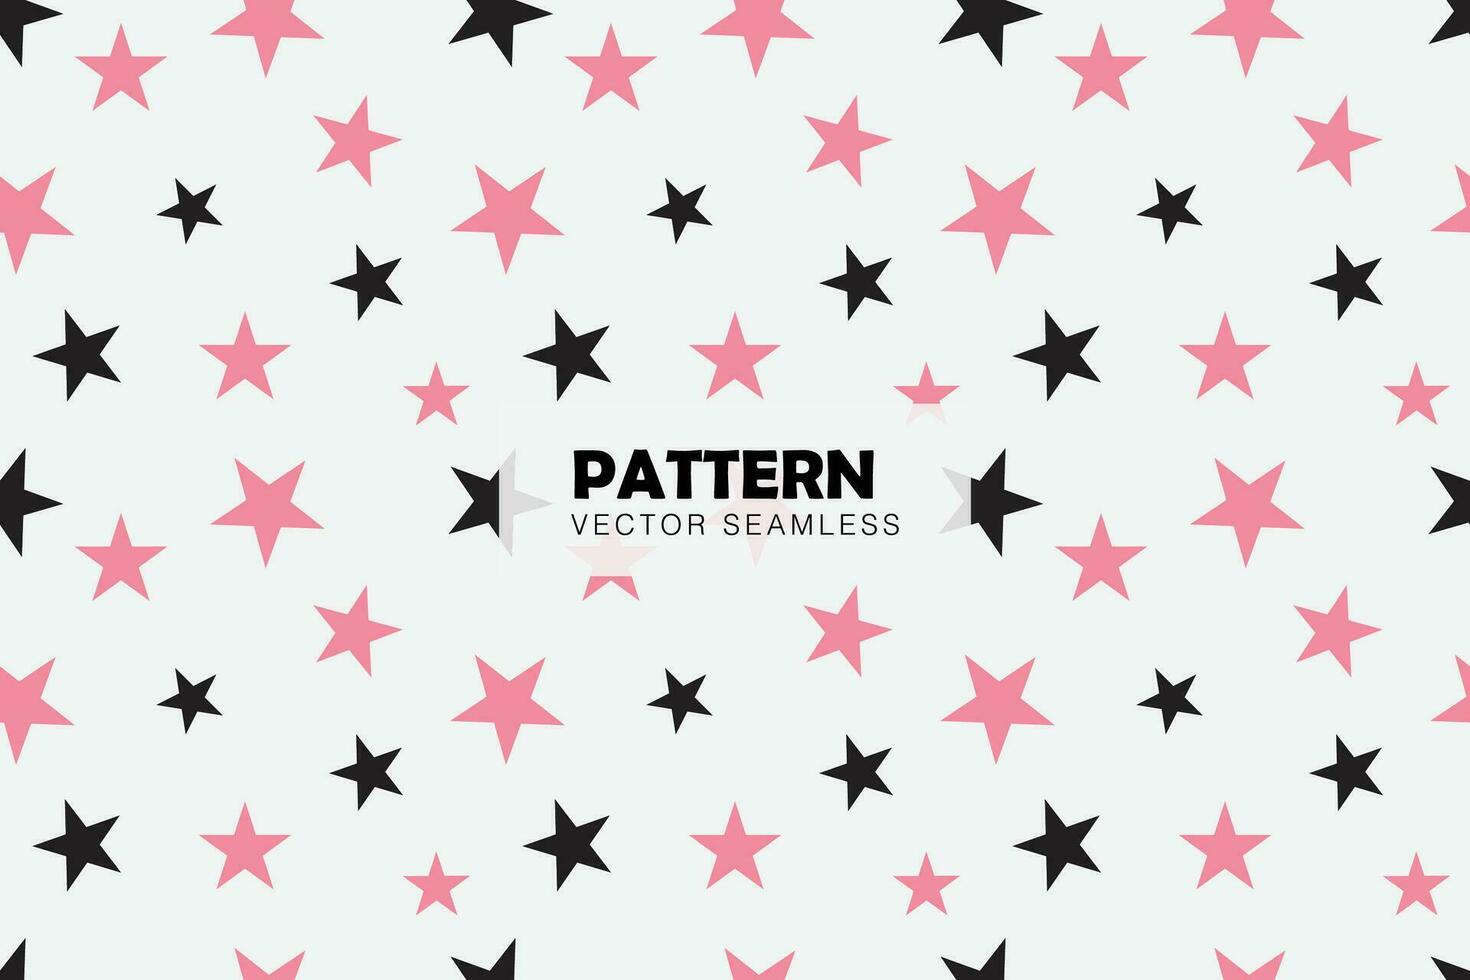 Black and pink stars geometric shapes seamless repeat pattern vector